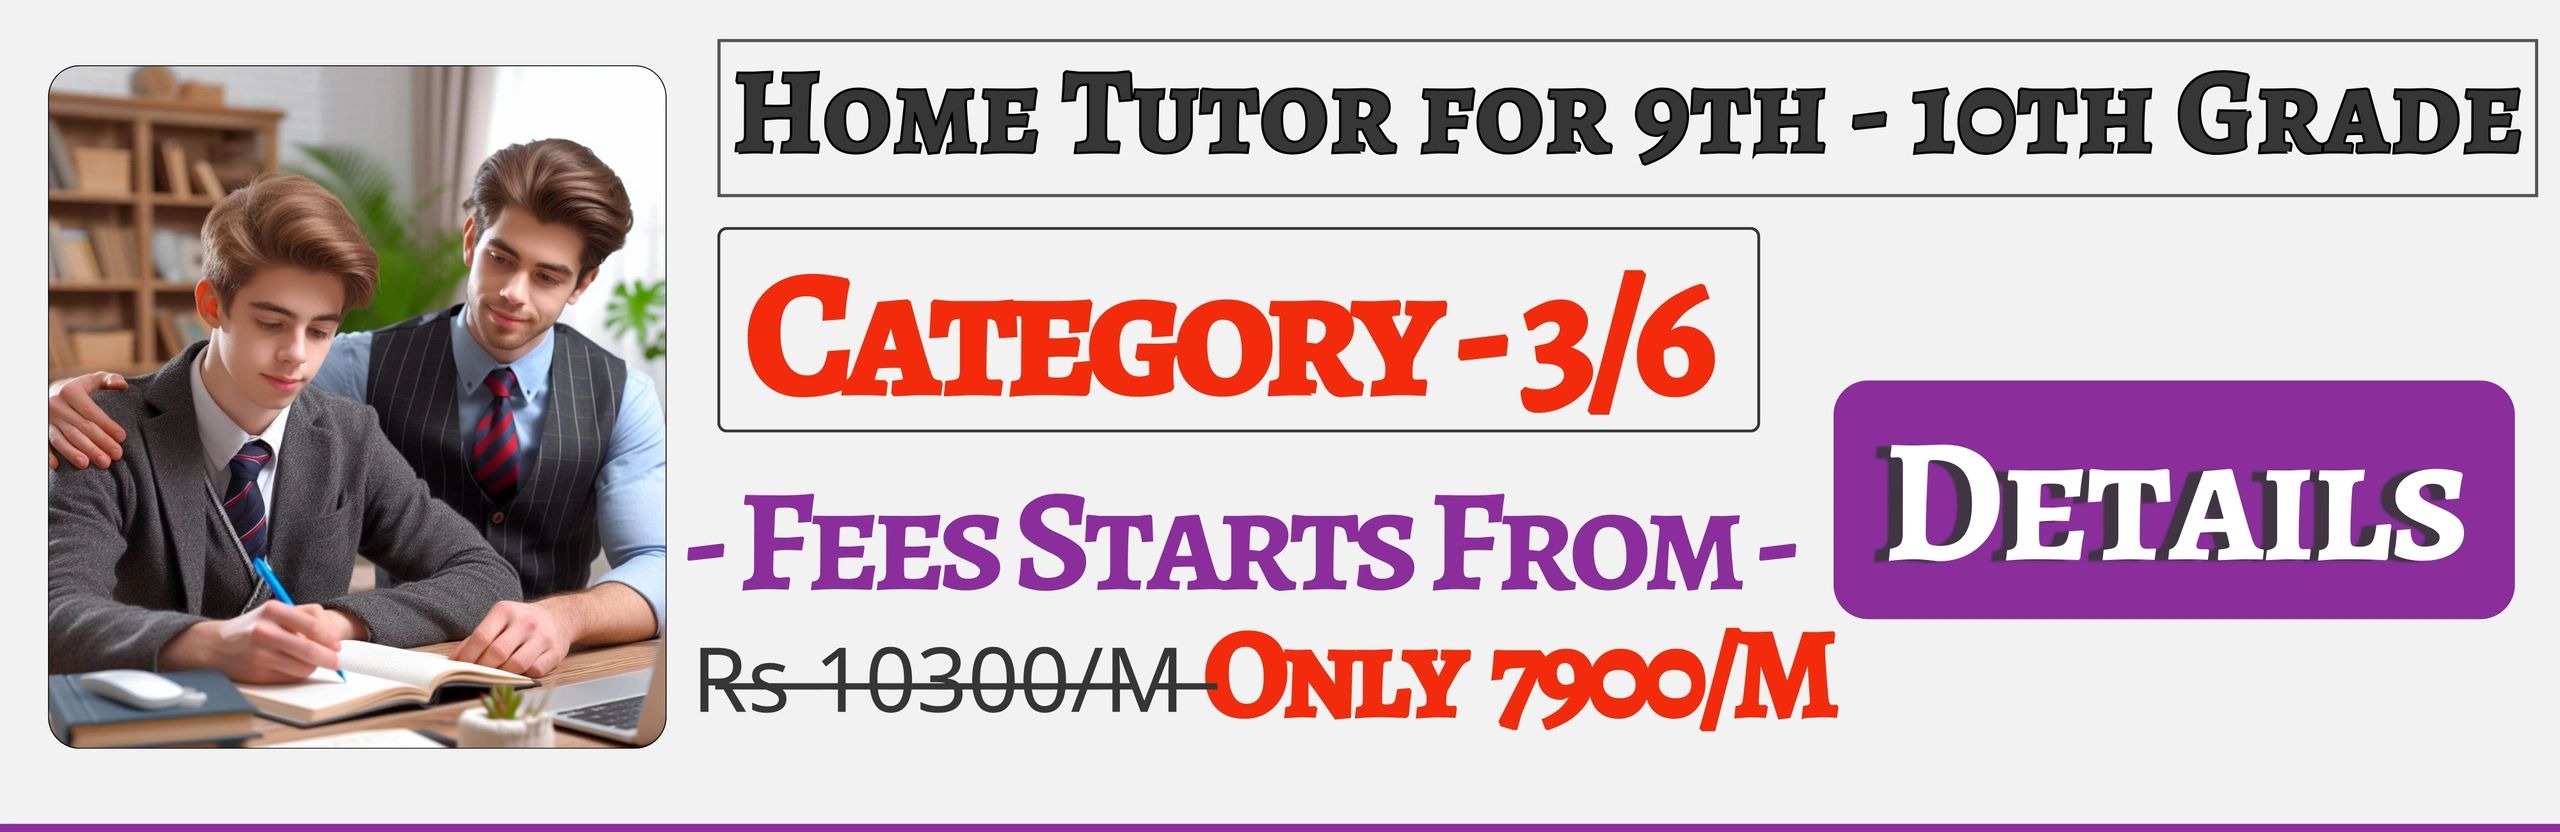 Book Best Home Tuition Tutors For 9th & 10th In Jaipur , Fees Only 7900/M